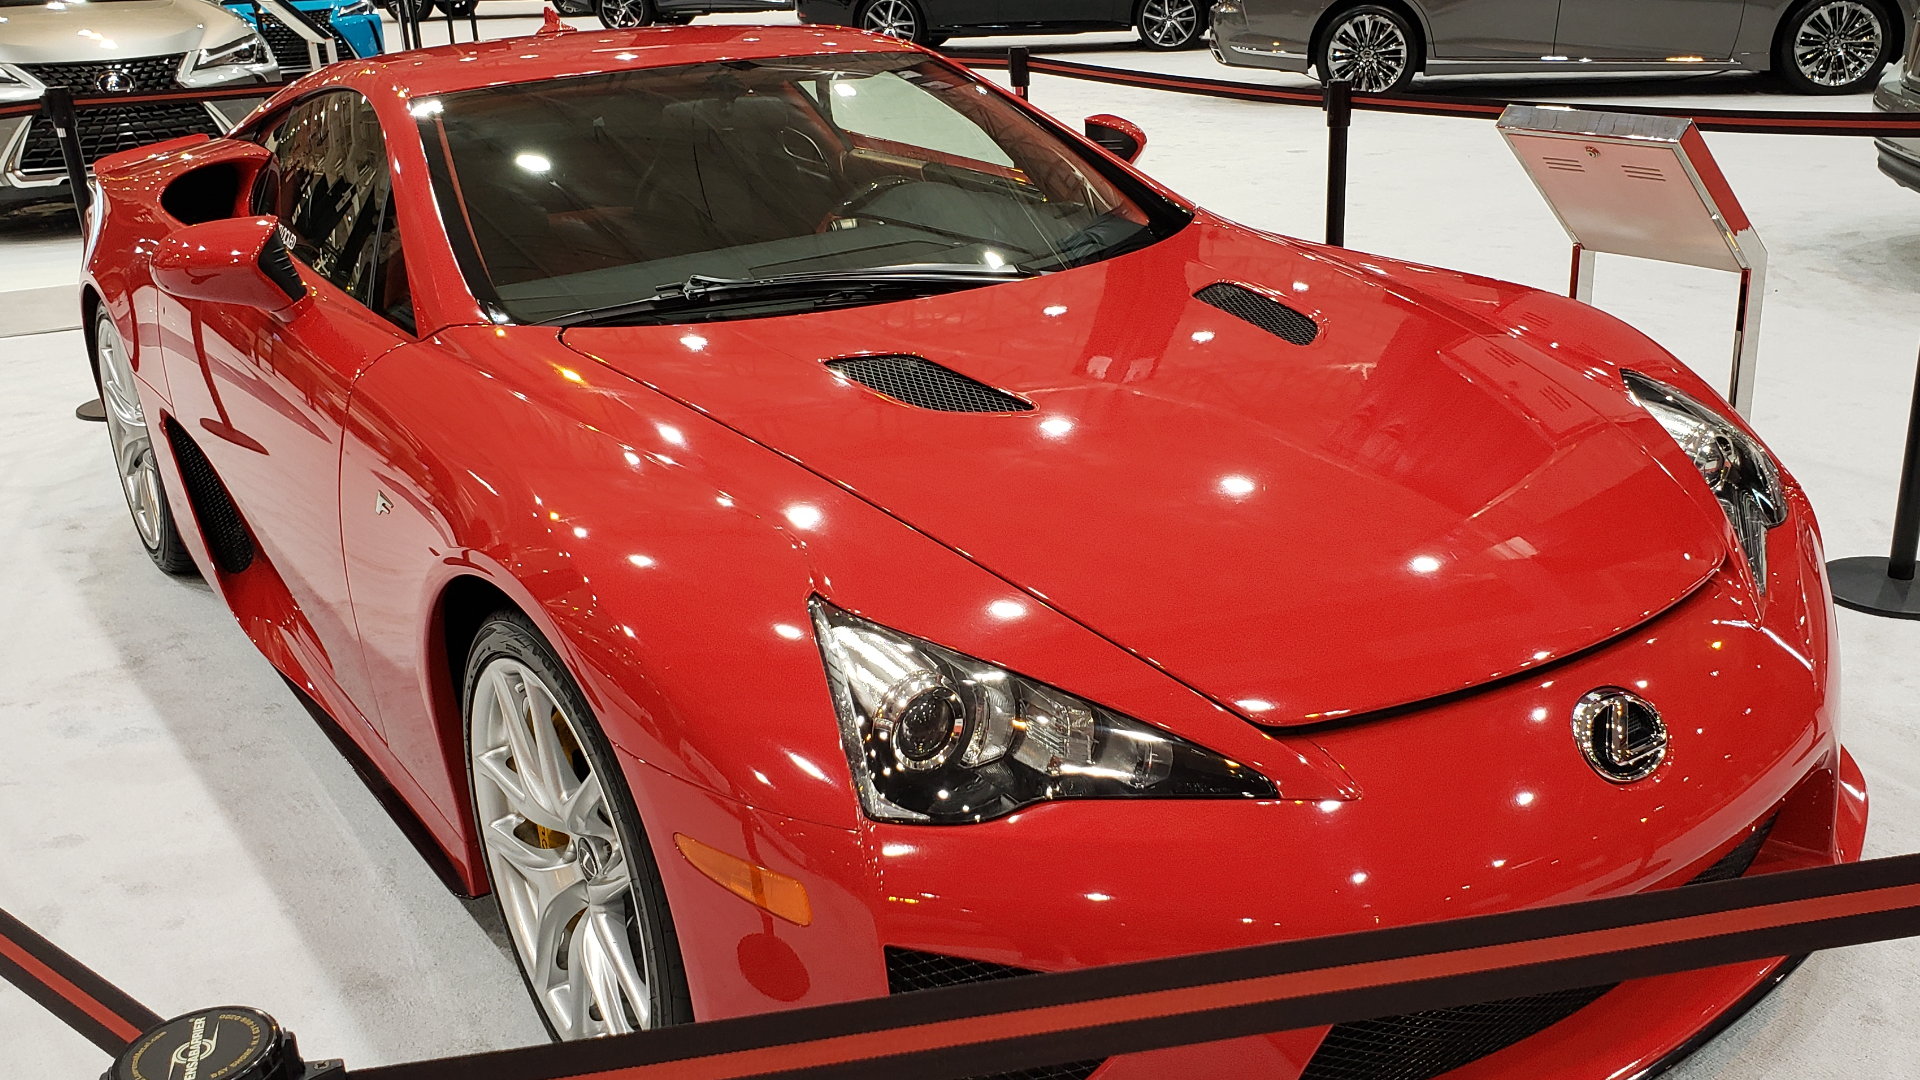 Cleveland Auto Show 2019 Everything you need to know from RideNDrive